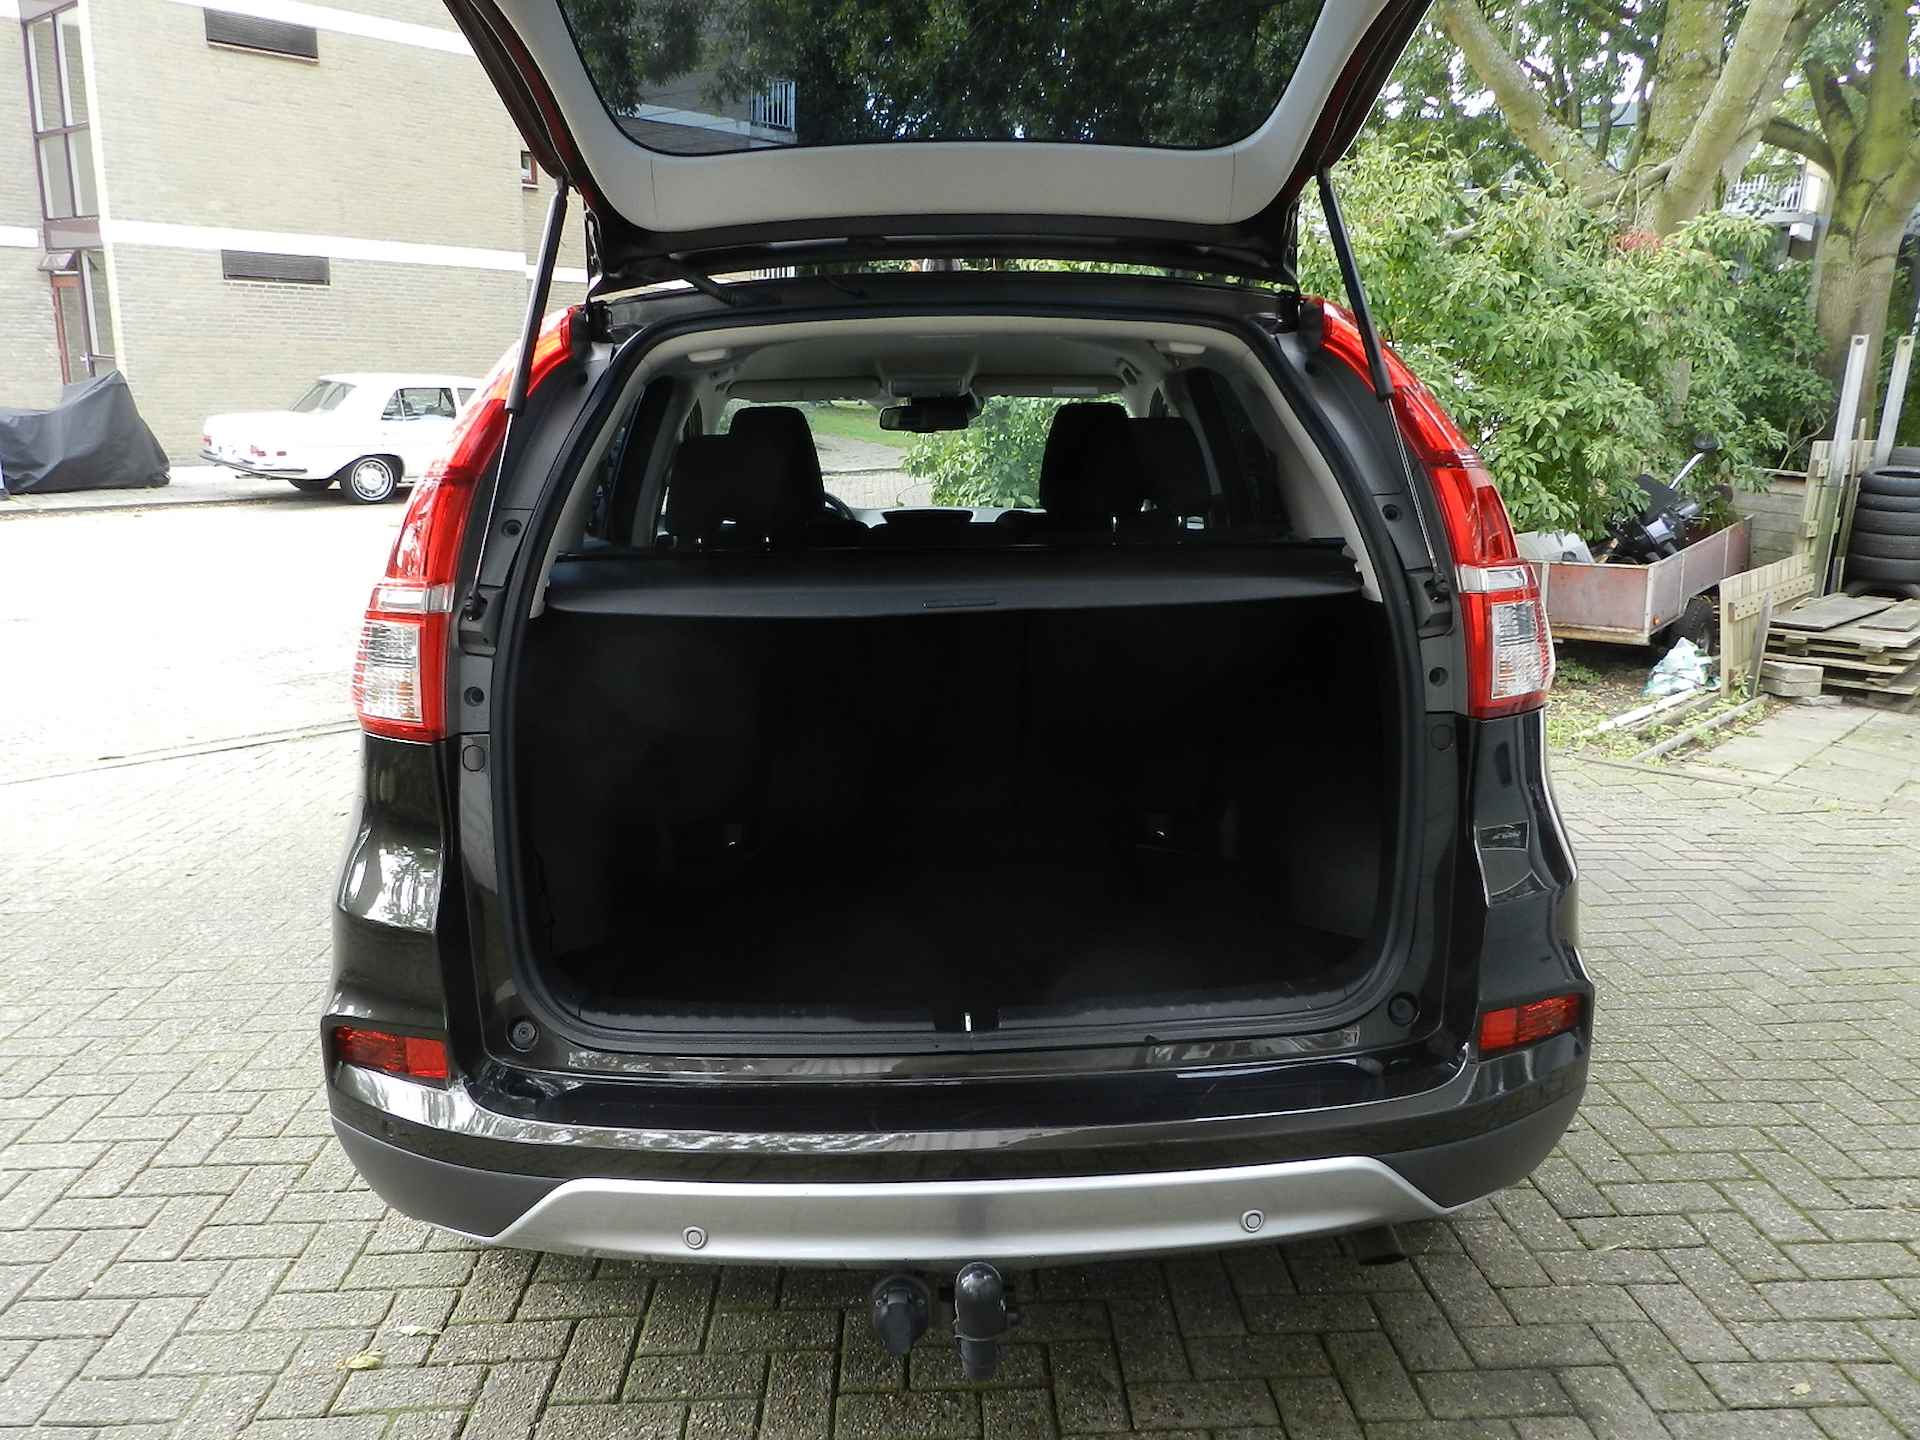 Honda CR-V 2.0 4WD Lifestyle Automaat Climate en Cruise contr PDC Camera - 16/50